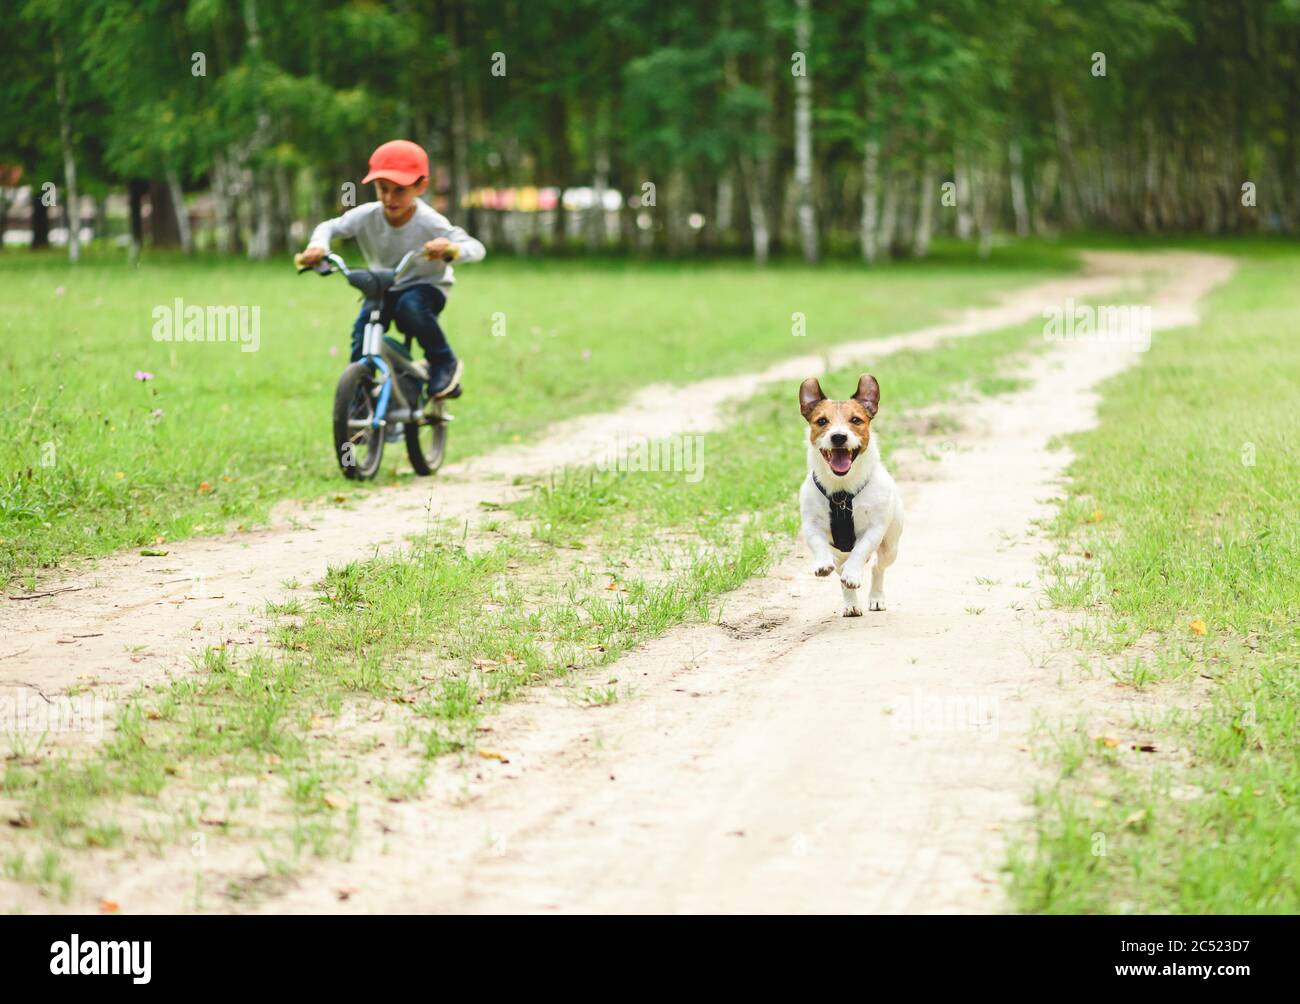 Dog and kid boy on bike racing on dirt country road on sunny summer day Stock Photo